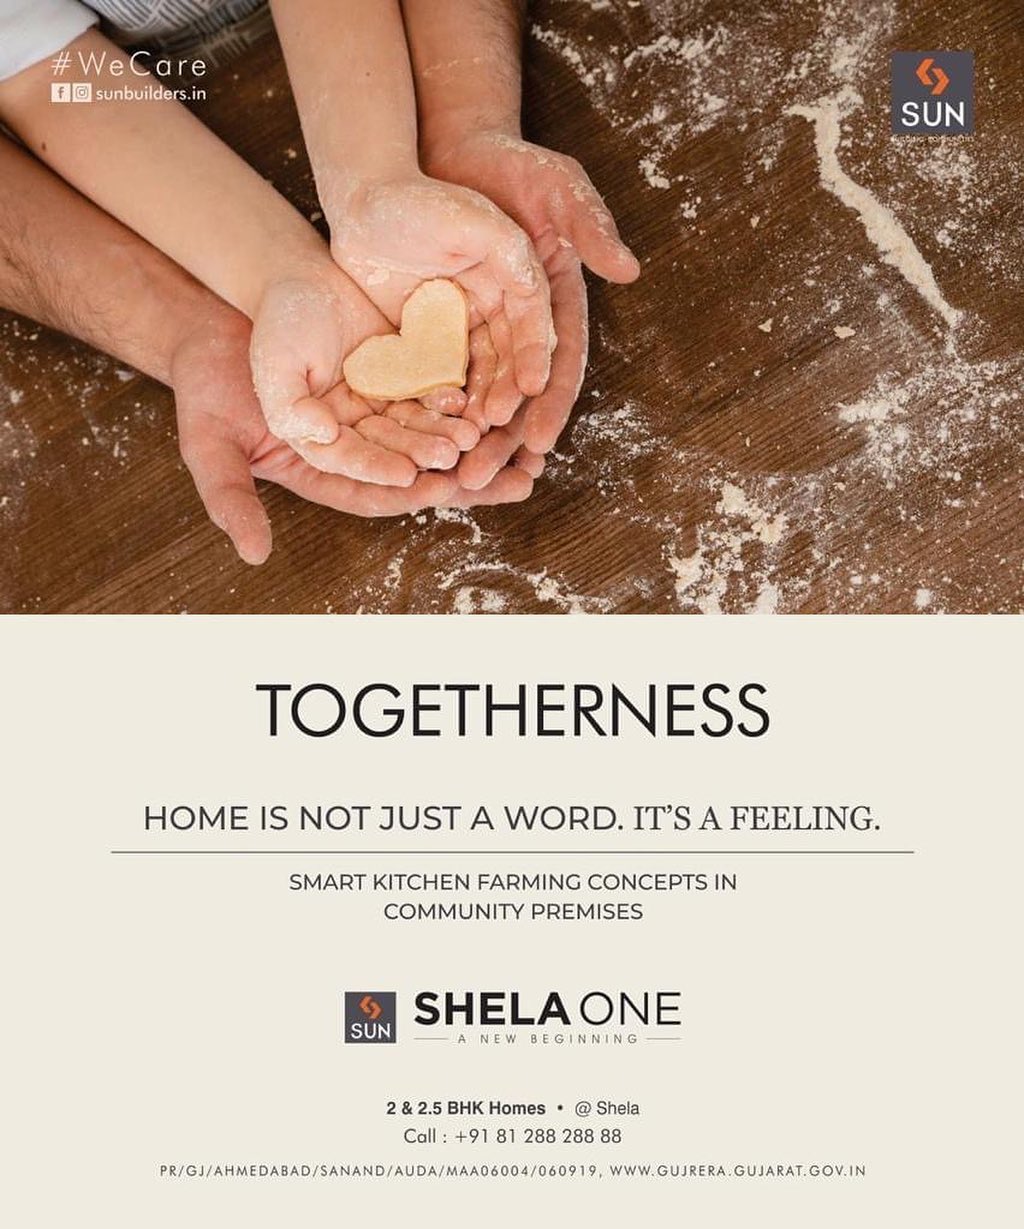 Nearly 4 decades of trust, quality construction, ethical practice and commitment is what you get with Us. 
Sun Shela One, 2 & 2.5 BHK apartments favorably located with all amenities within close proximity ensuring all your necessities are within easy reach. Well planned & designed aesthetically, you can rest assured of creating the best memories.

For Details Call +91 987932061

#retail #apartments #shela #budgethomes #2bhk #safeinvestment #qualityconstruction #ethics #realestateahmedabad #sunbuildersgroup #staysafe #wecare